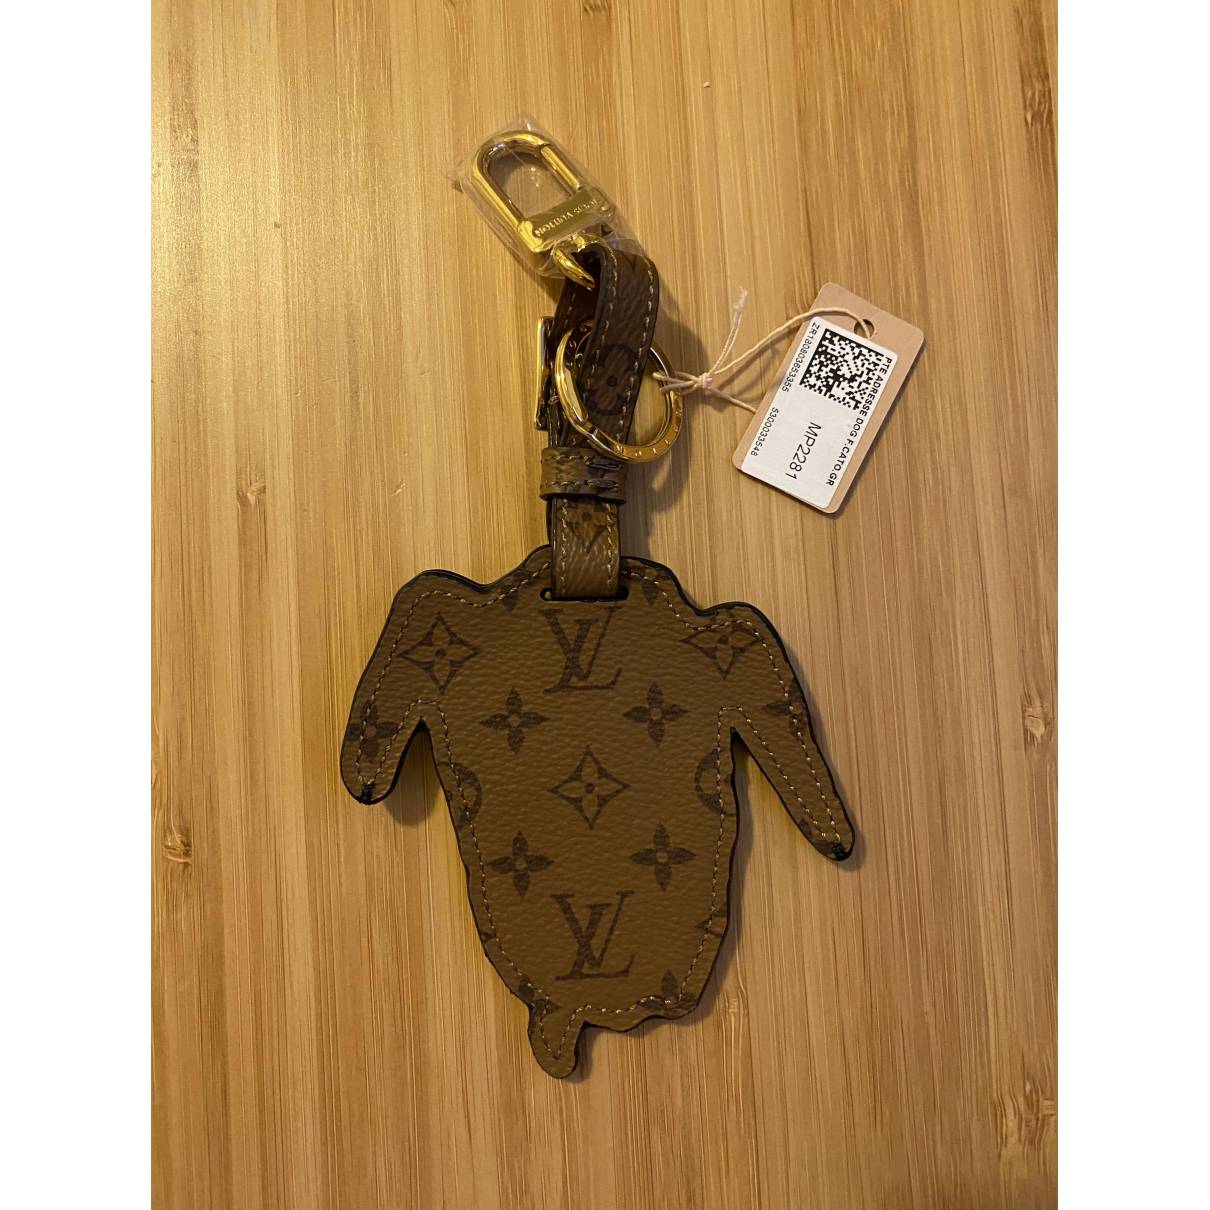 Louis Vuitton - Authenticated Monogram Bag Charm - Leather Black for Women, Never Worn, with Tag